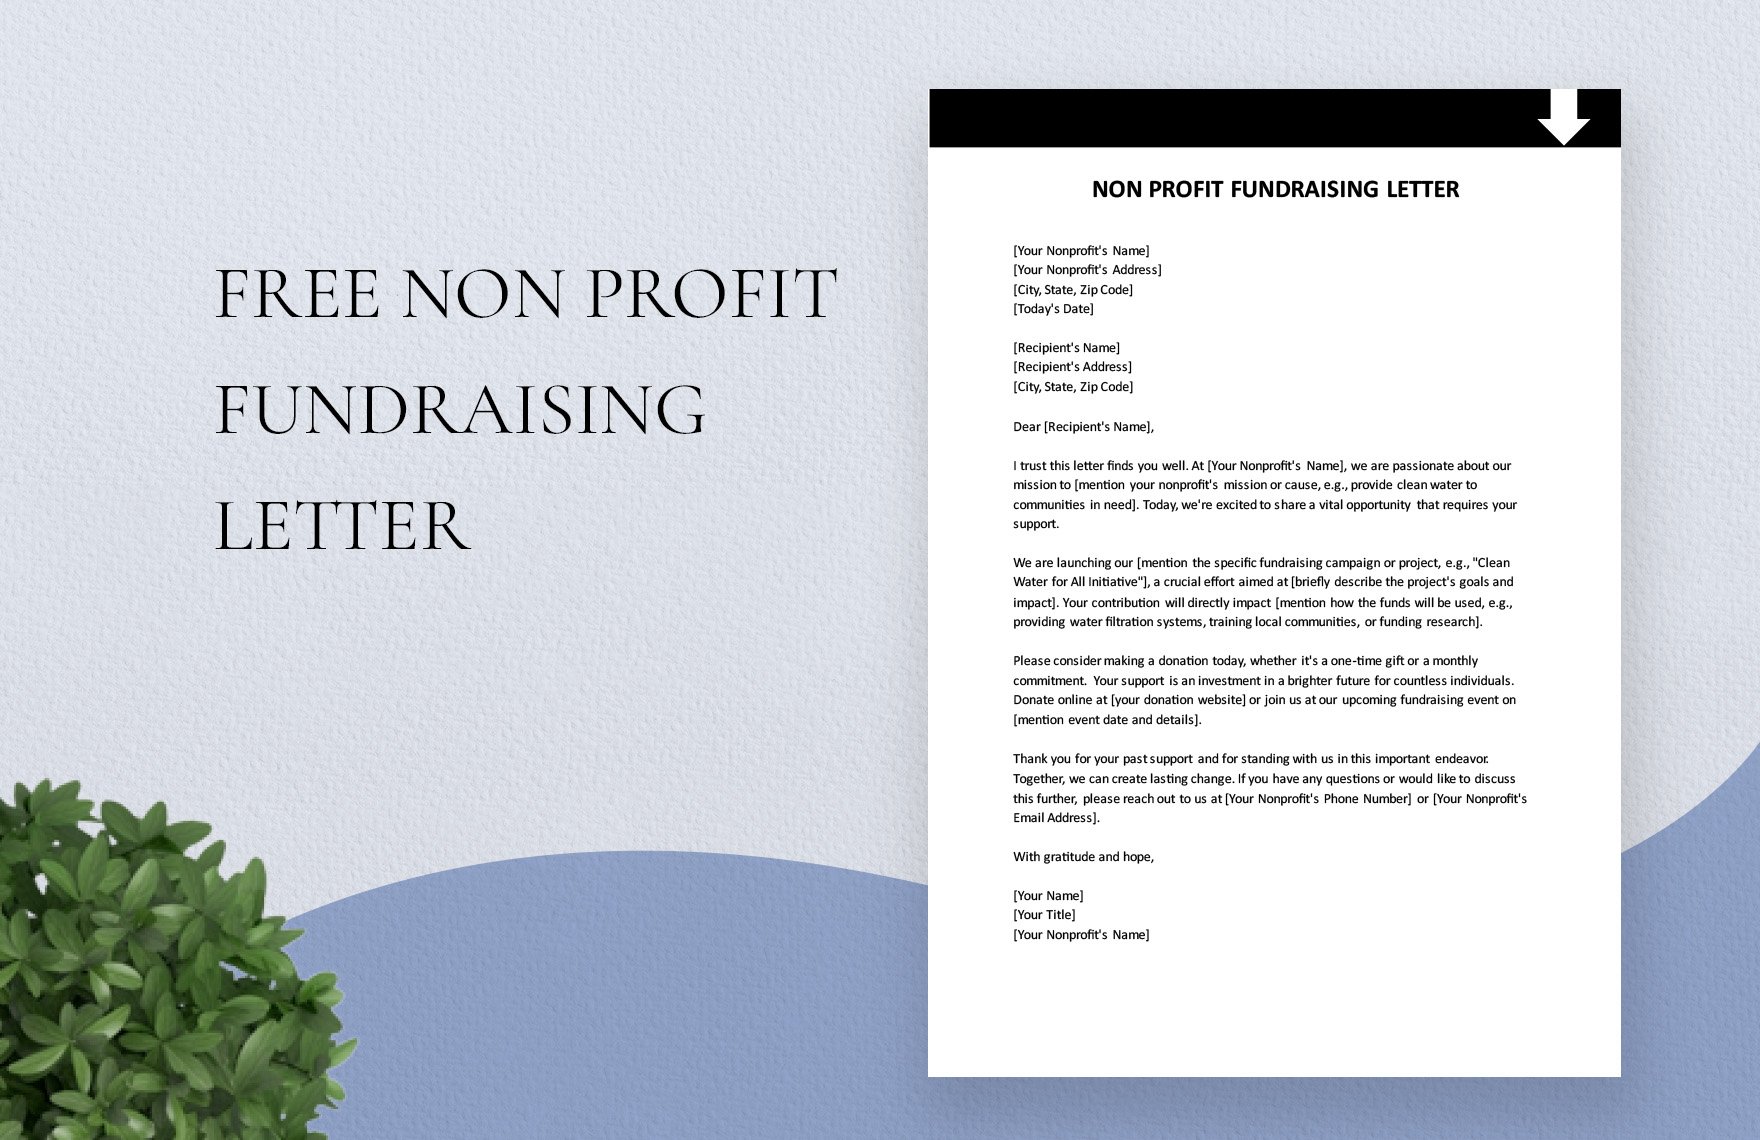 Free Nonprofit Fundraising Letter Download in Word, PDF